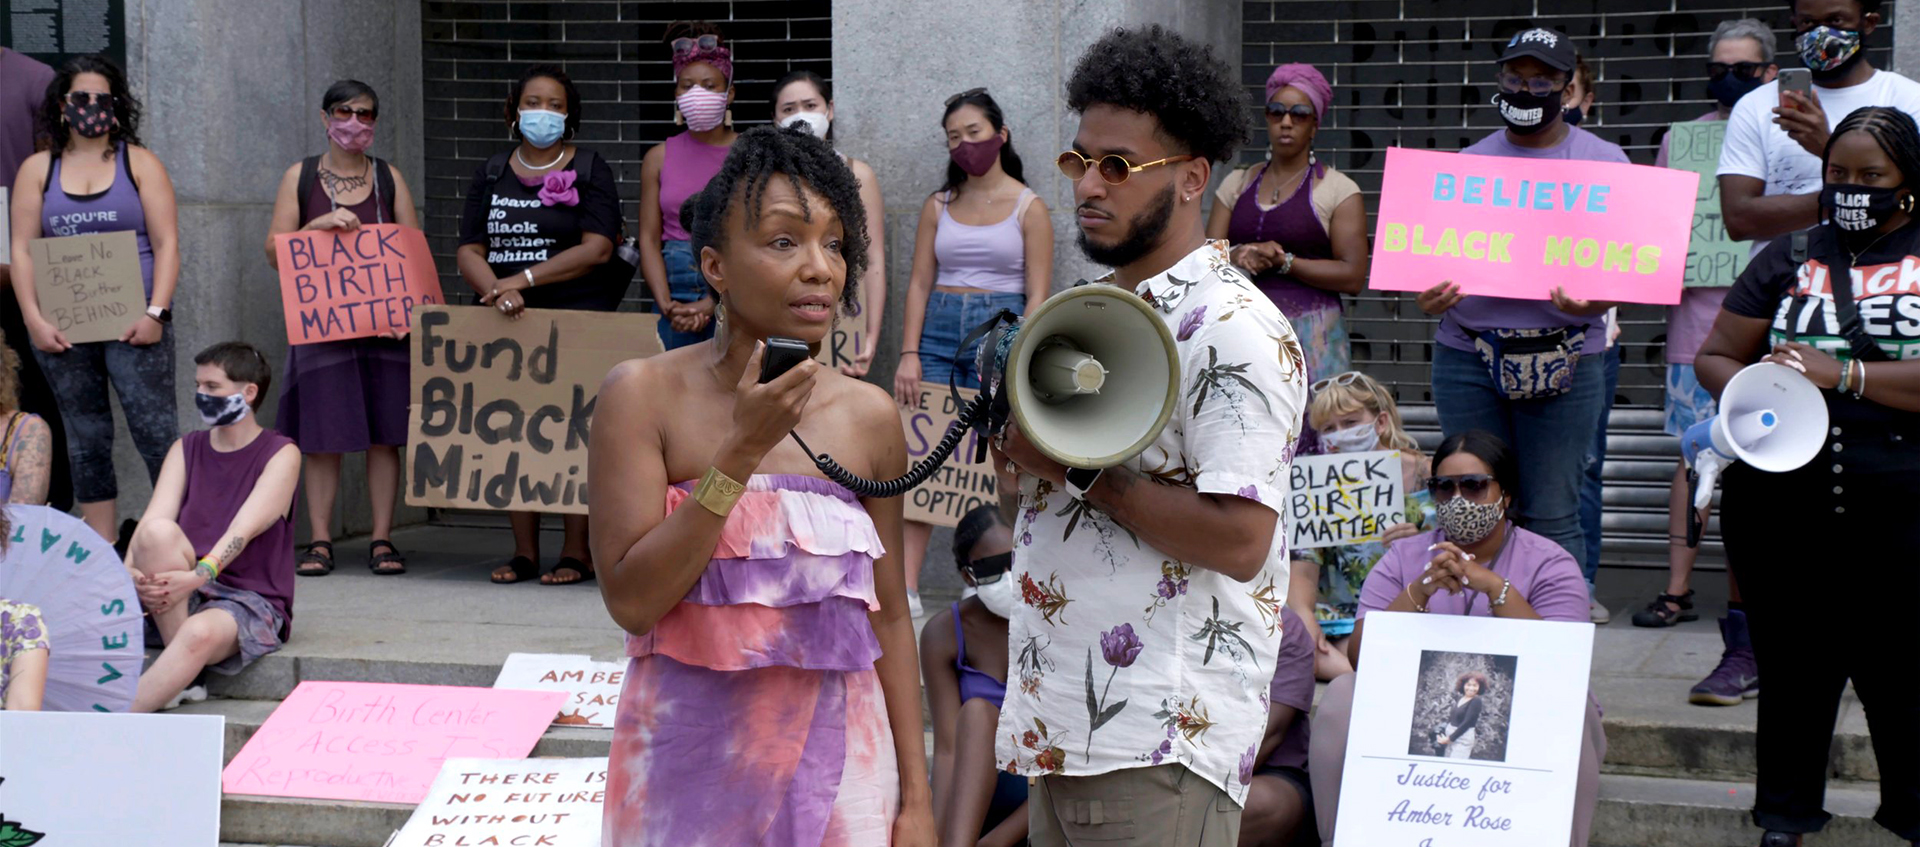 A group of people holding protest signs about justice for Black mothers. Two Black people stand in front of the group holding a megaphone.